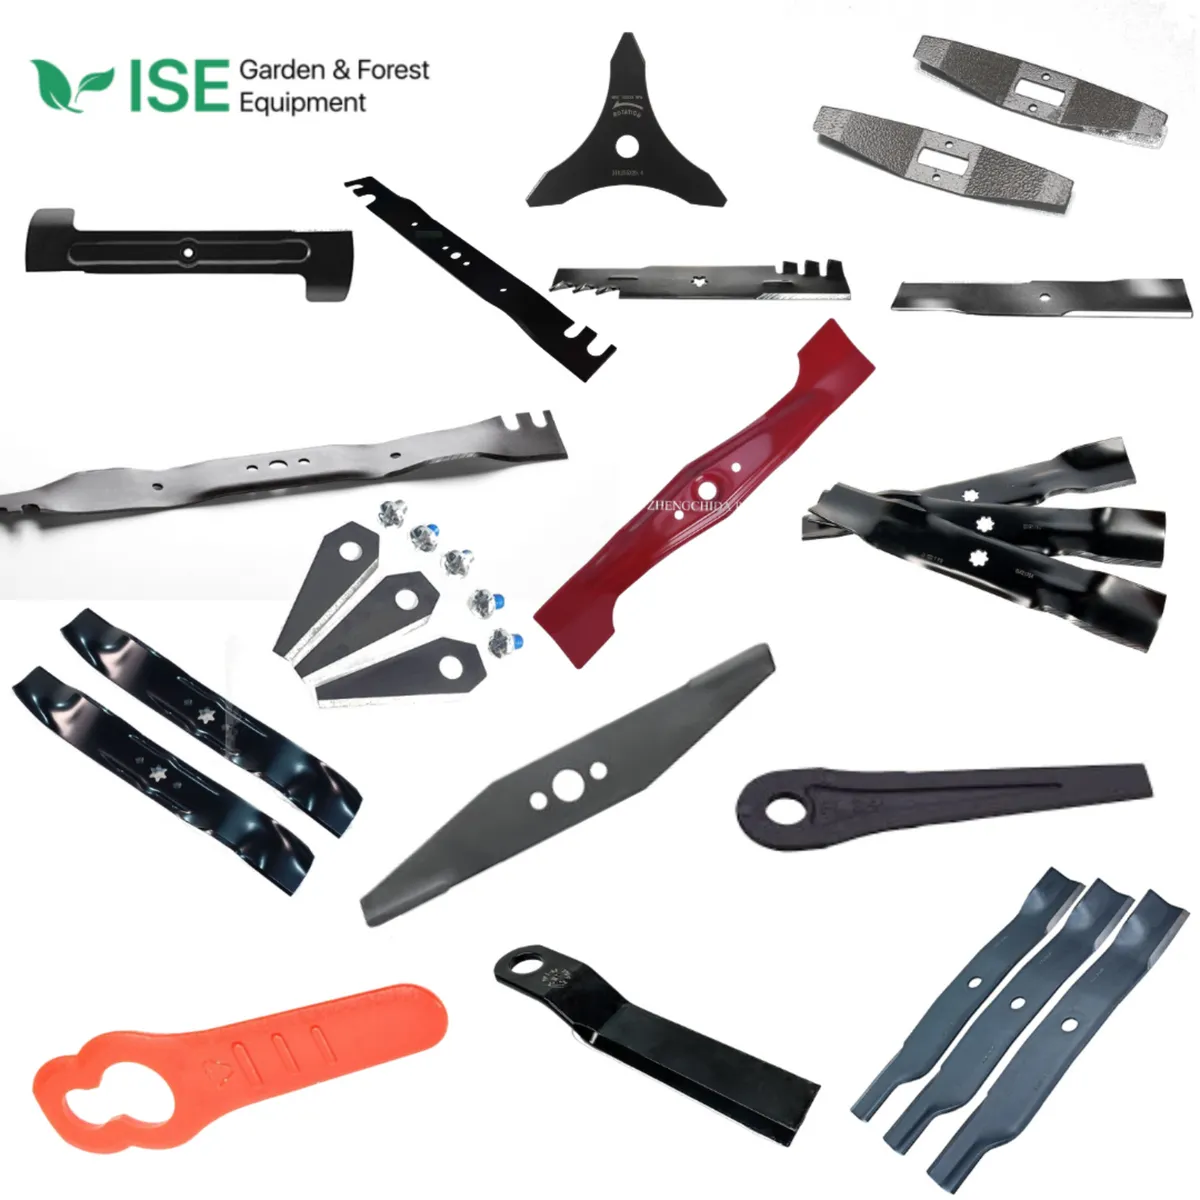 Lawnmower Blades for all machines - FREE DELIVERY - Image 1